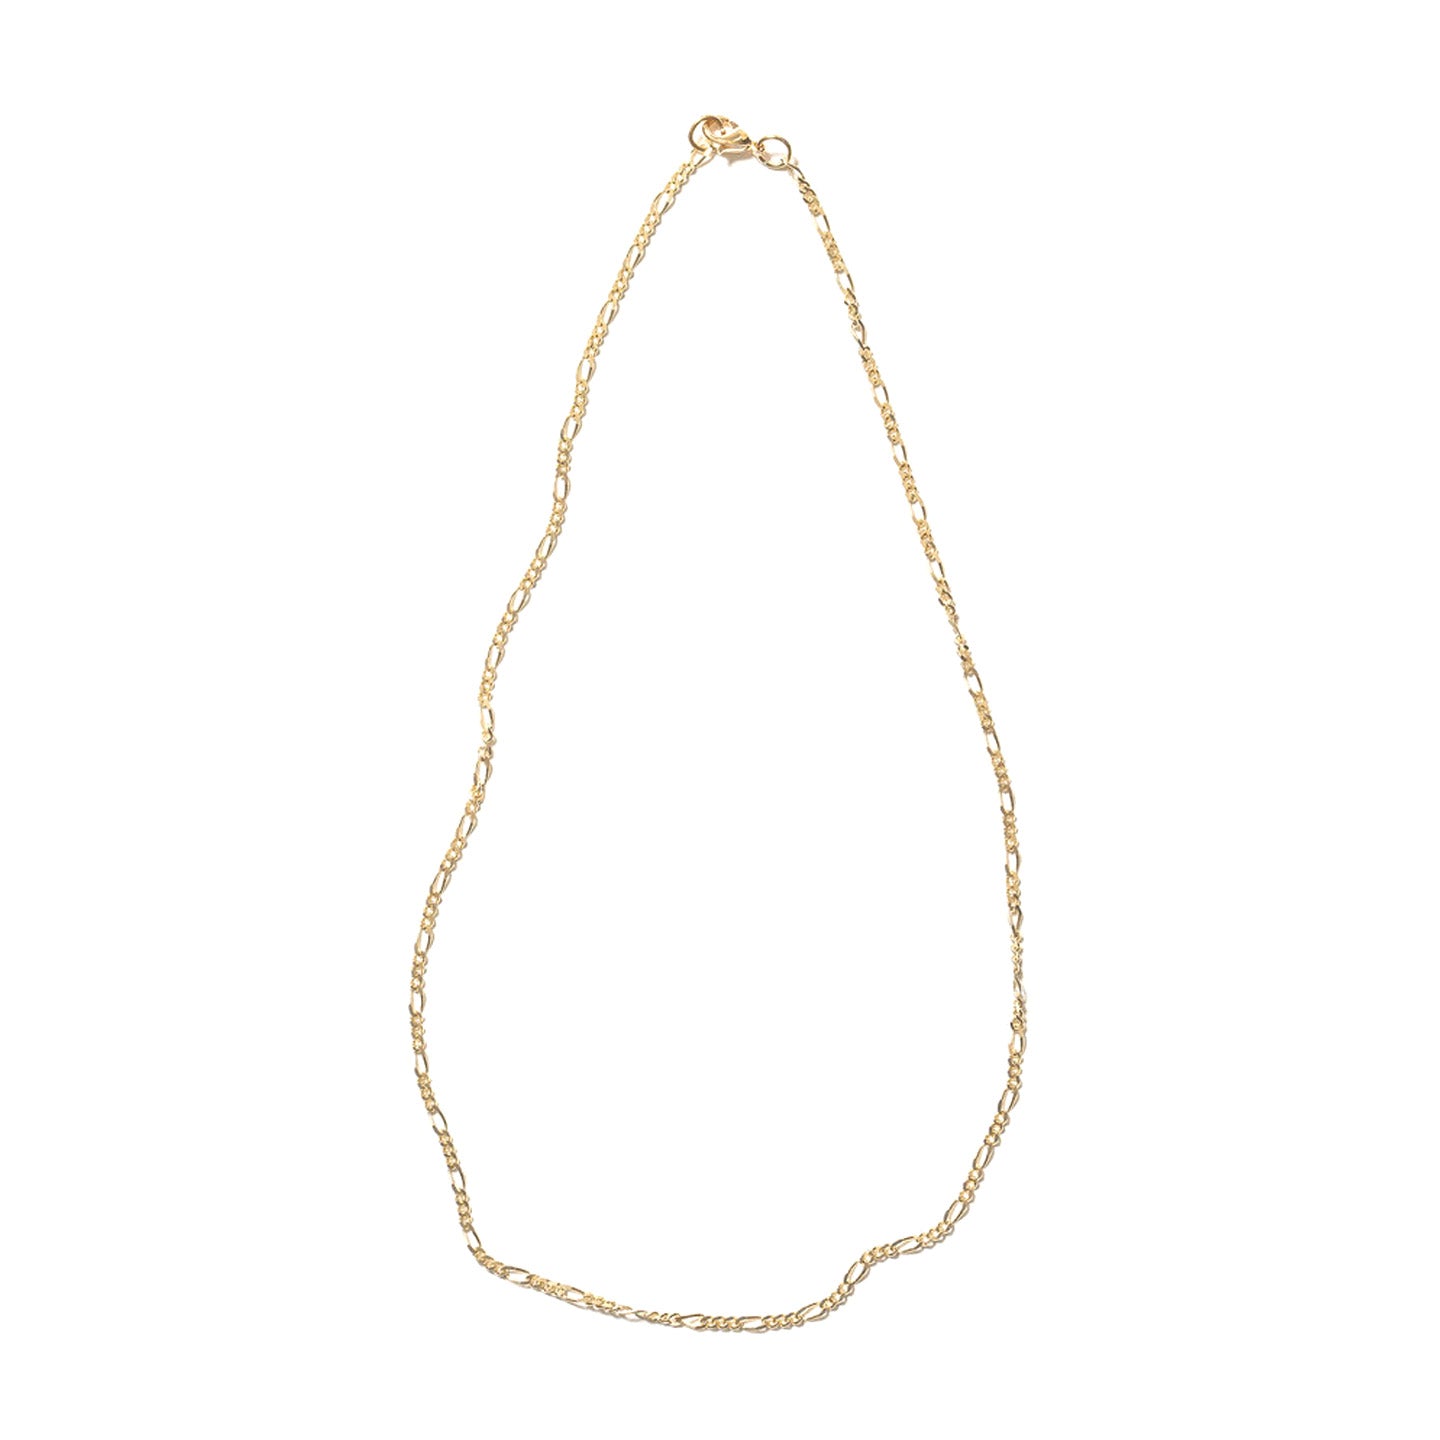 MAPLE FIGARO CHAIN 14K GOLD FILLED